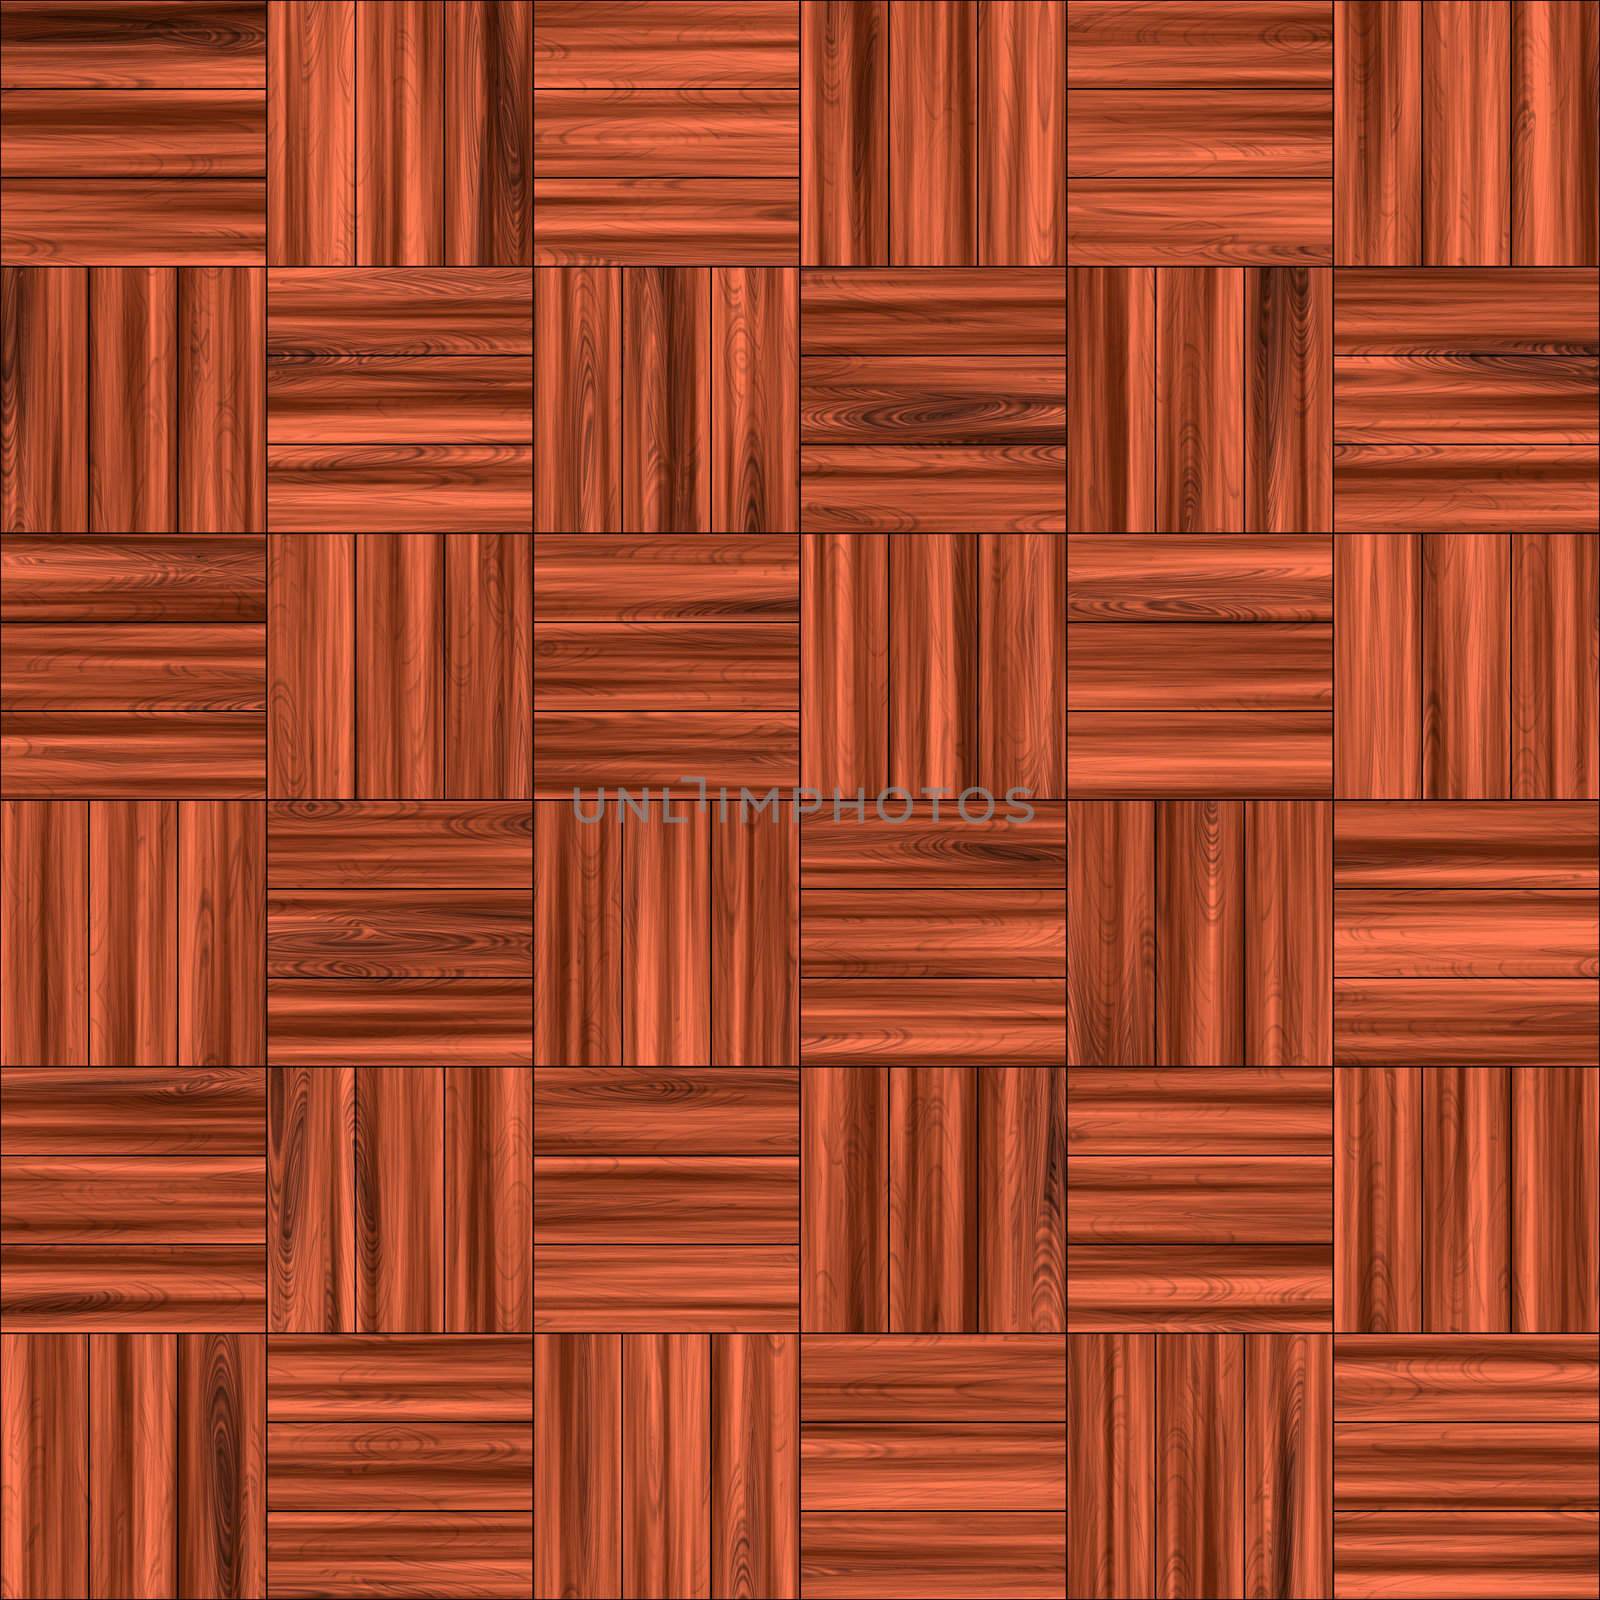 Checkered Wooden Floor by graficallyminded